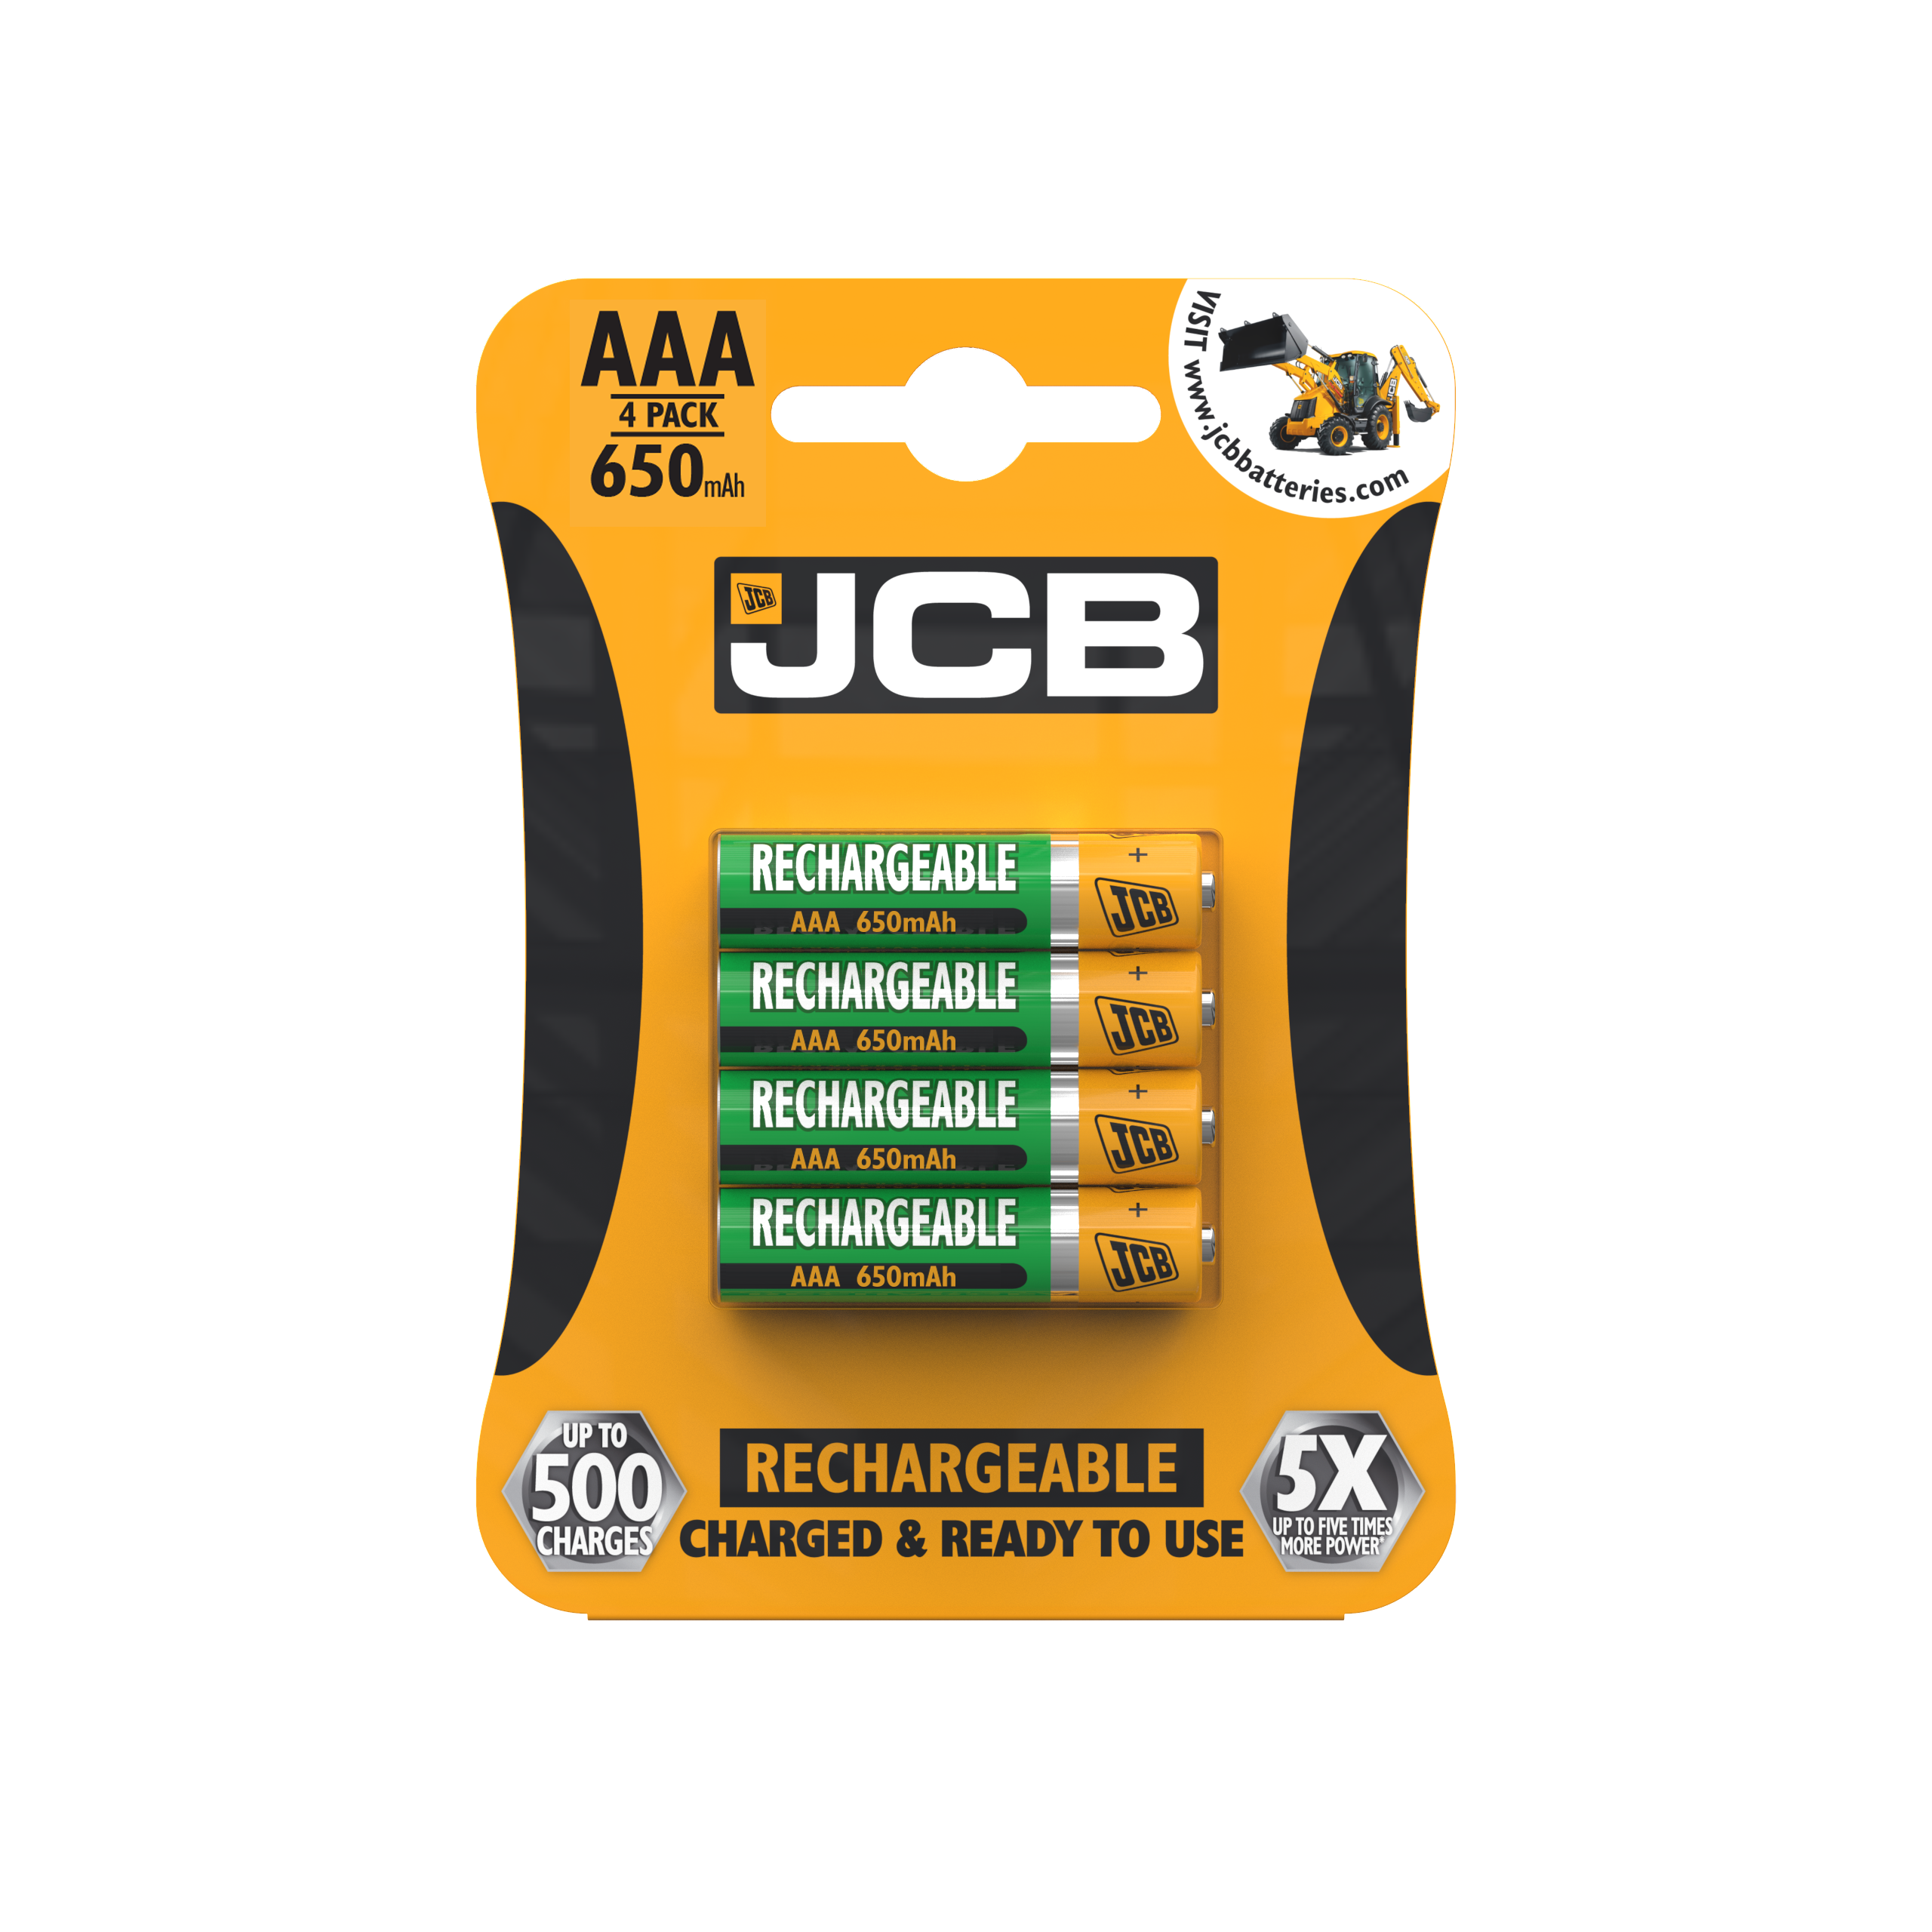 JCB AAA 650mAh Rechargeable, Pack of 4